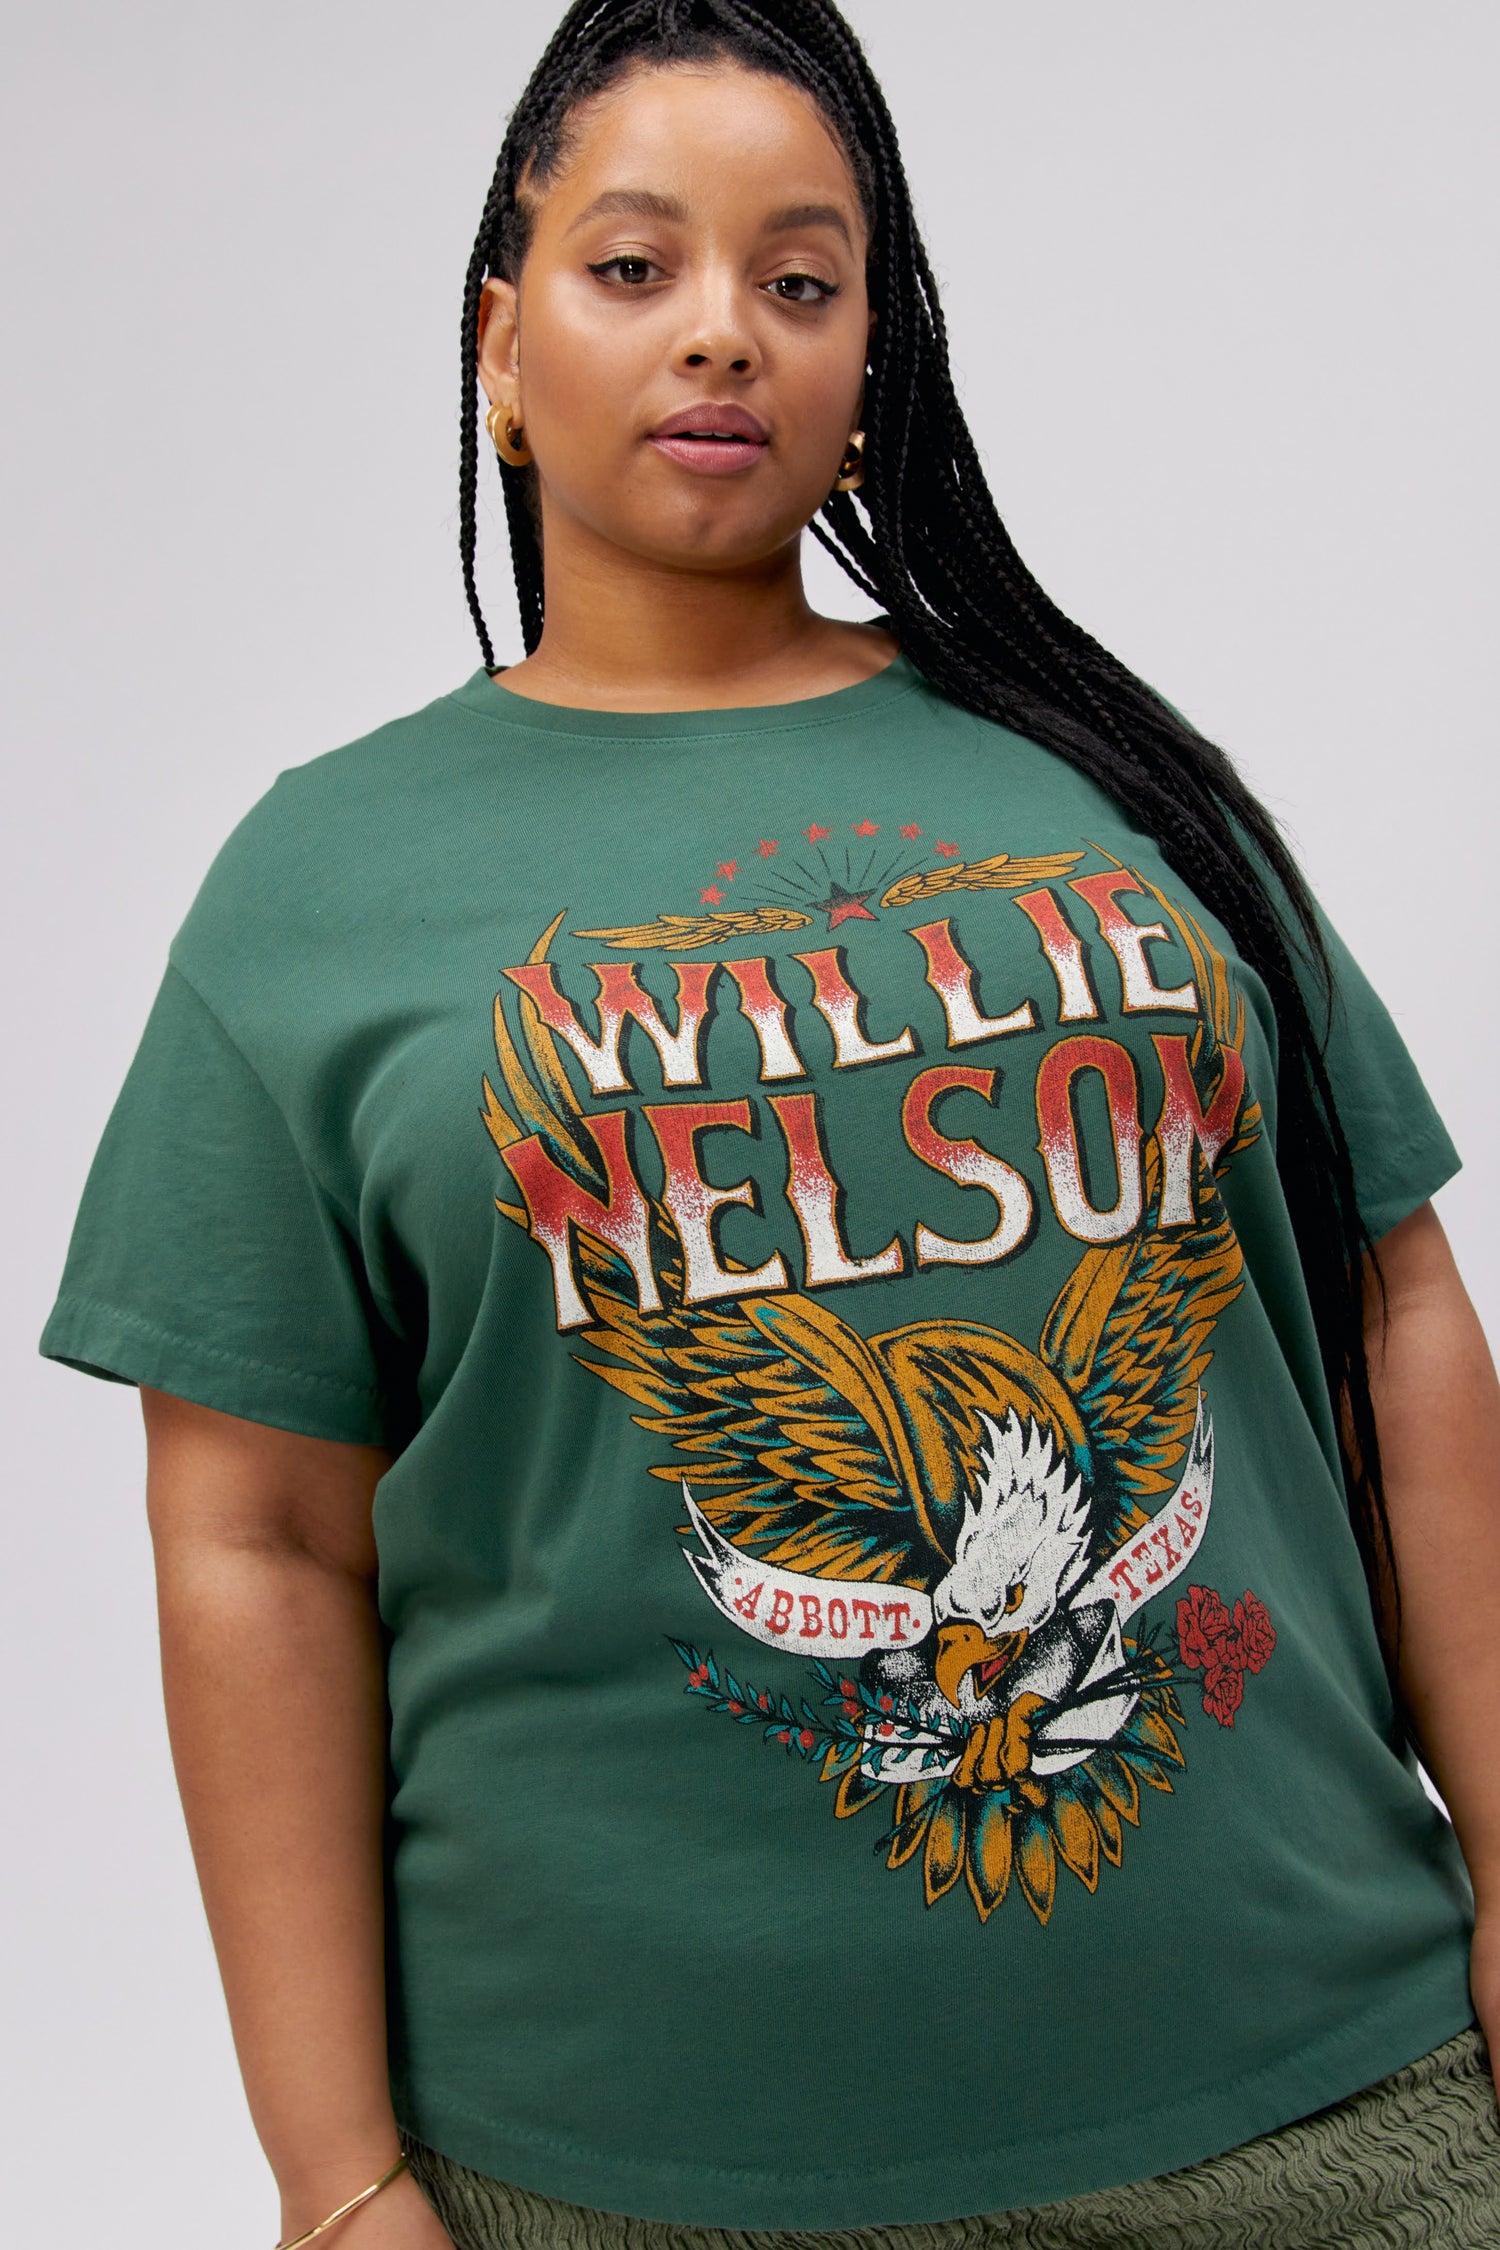 A dark-haired model featuring a green tee stamped with 'Willie Nelson' and designed with a bird with 'Abott Texas' on its mouth.